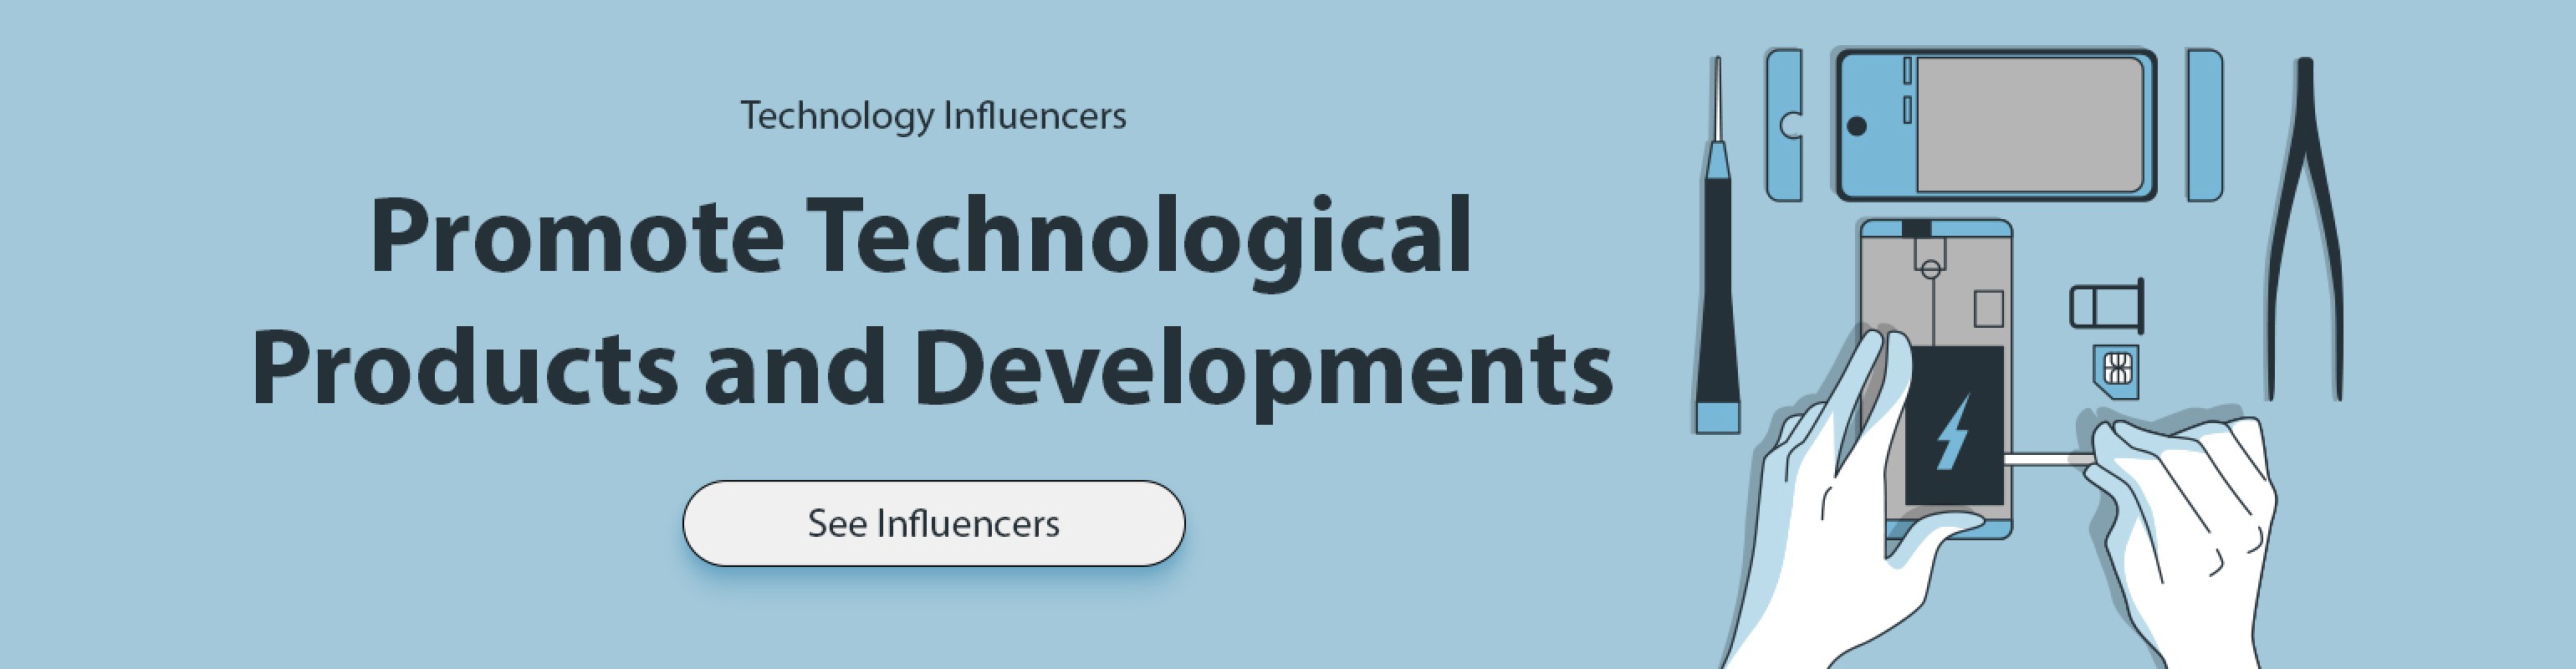 technology influencers